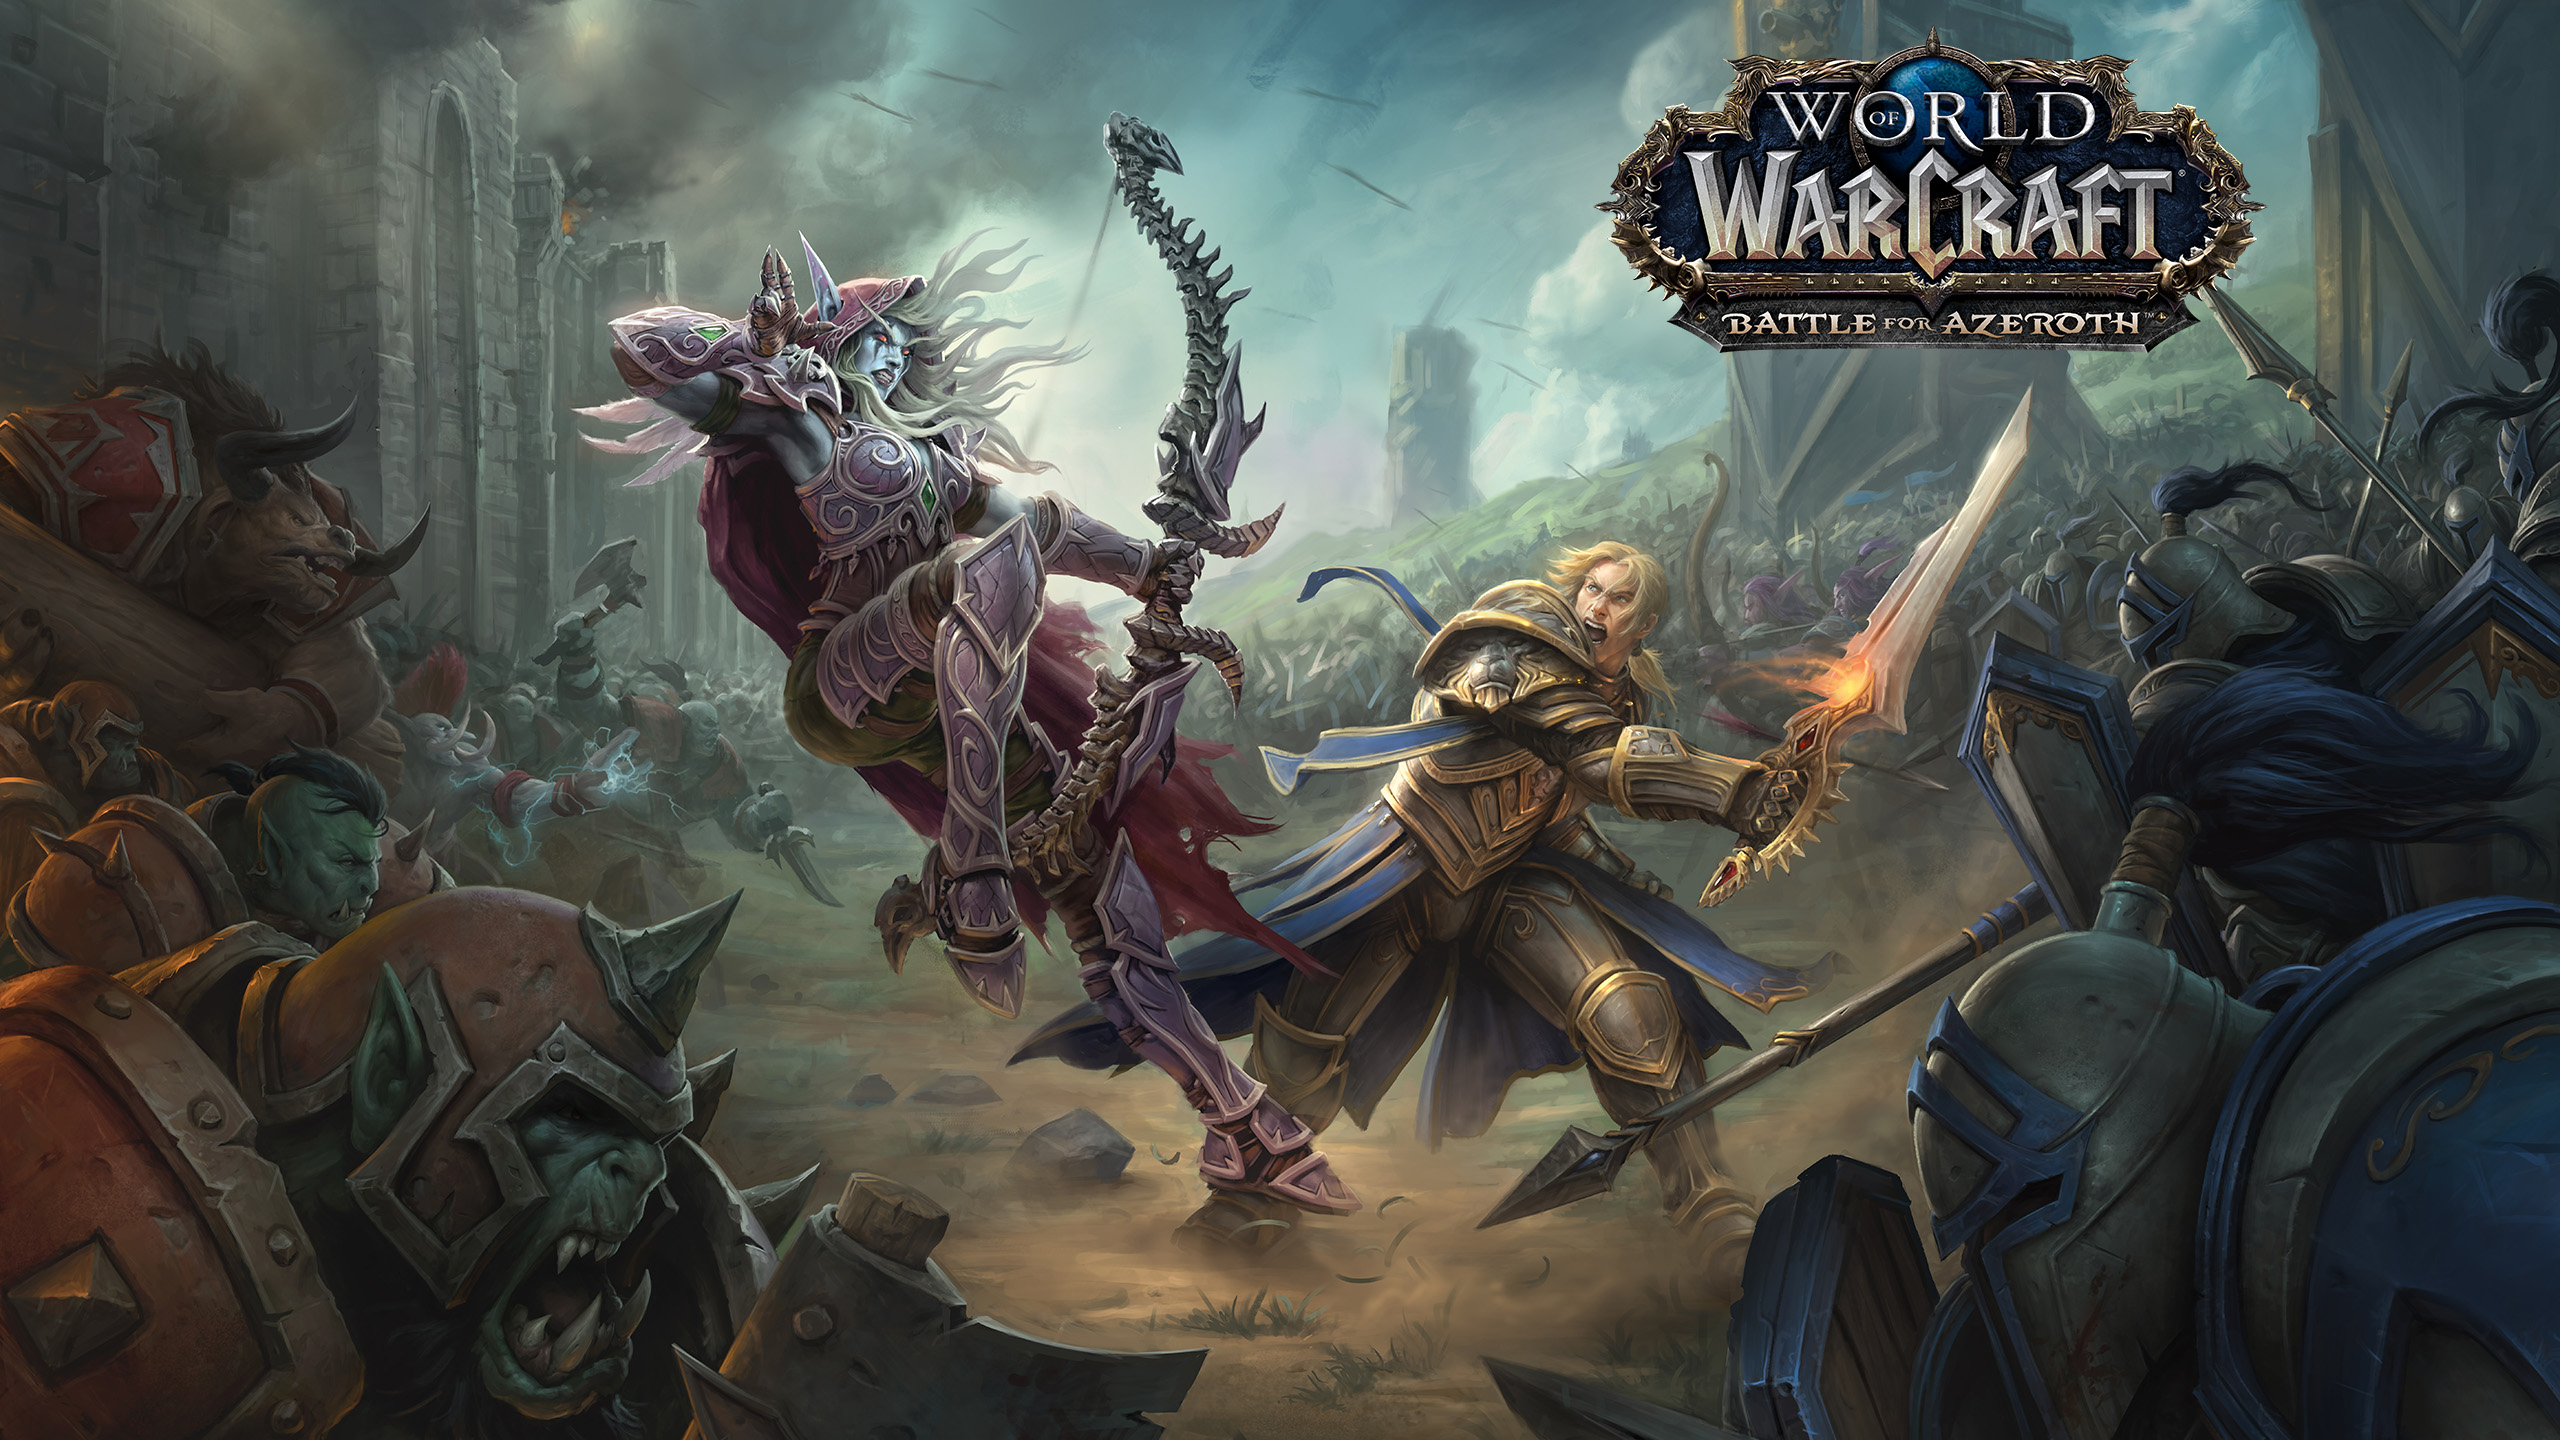 World of Warcraft- Battle for Azeroth is now available for pre-order